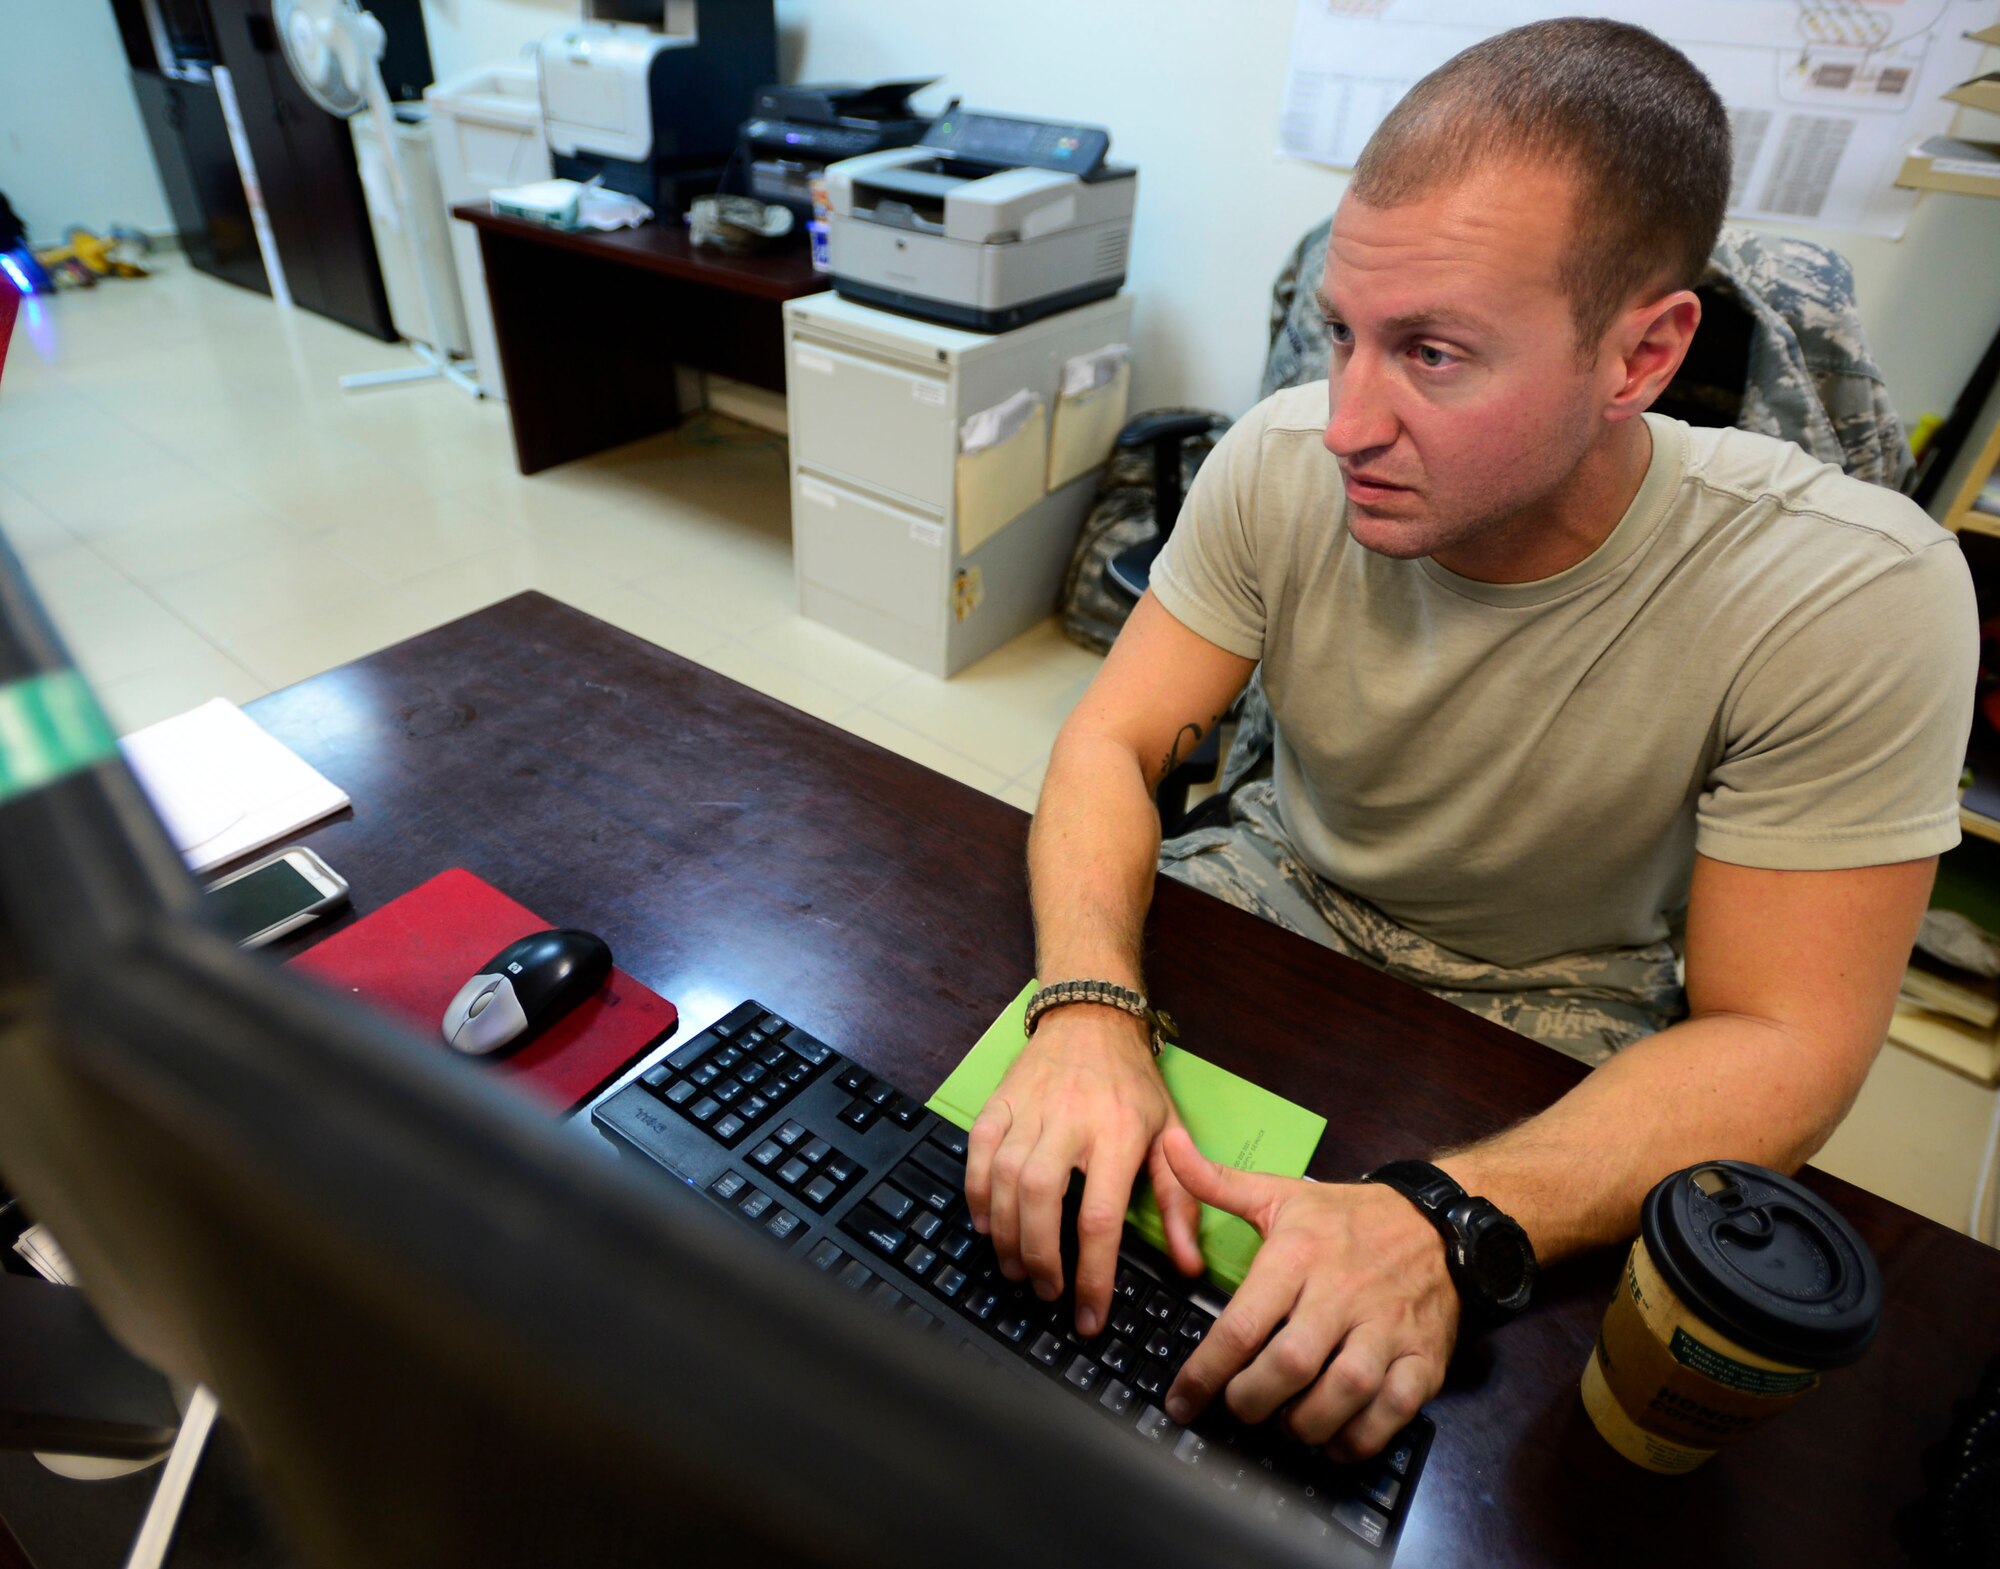 U.S. Air Force Staff Sgt. Kristopher Sosebee, 386 Expeditionary Operations Support Squadron deputy airfield manager, updates a spreadsheet during Operation Inherent Resolve at an undisclosed location in Southwest Asia, Aug. 4, 2015. To stay one step ahead of the Da’esh, airfield management procures, maintains, and produces information regarding safe operation of aircraft on the airfield and through the national and international airspace. (U.S. Air Force photo by Senior Airman Racheal E. Watson/Released)